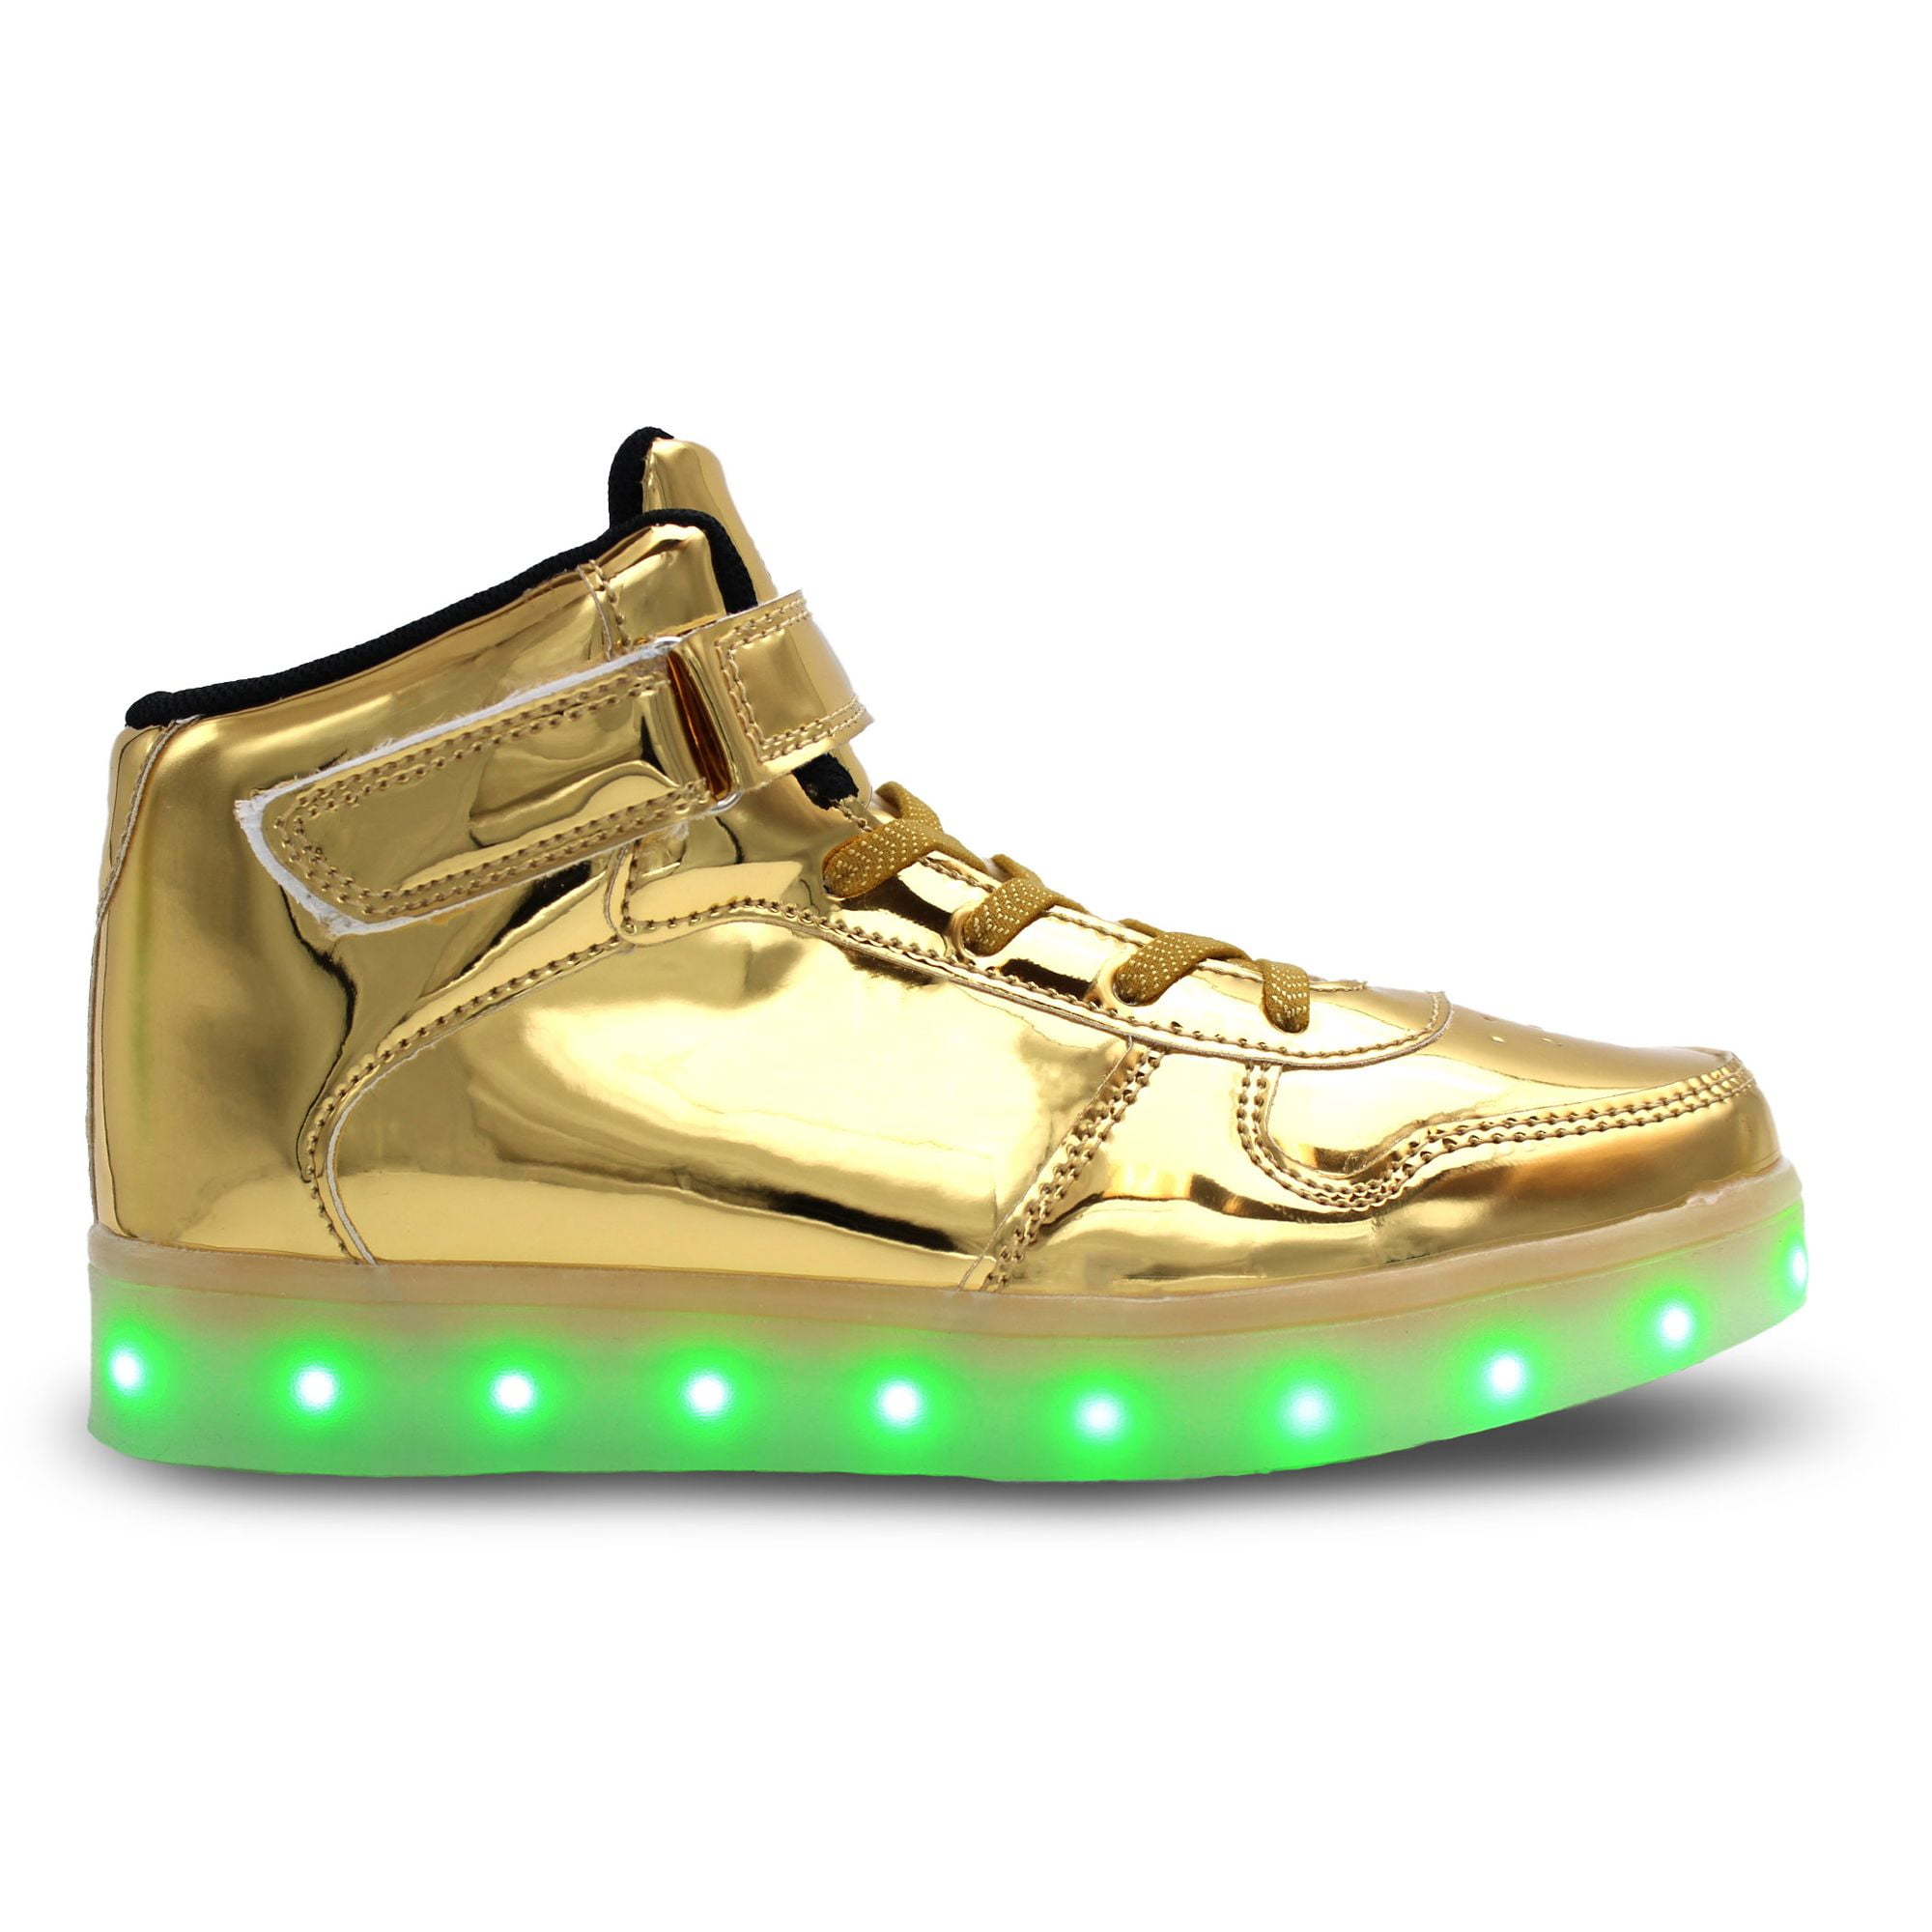 Little Kid/Big Kid Believed Boy and Girls Low Top Led Sneakers Light up Flashing Shoes